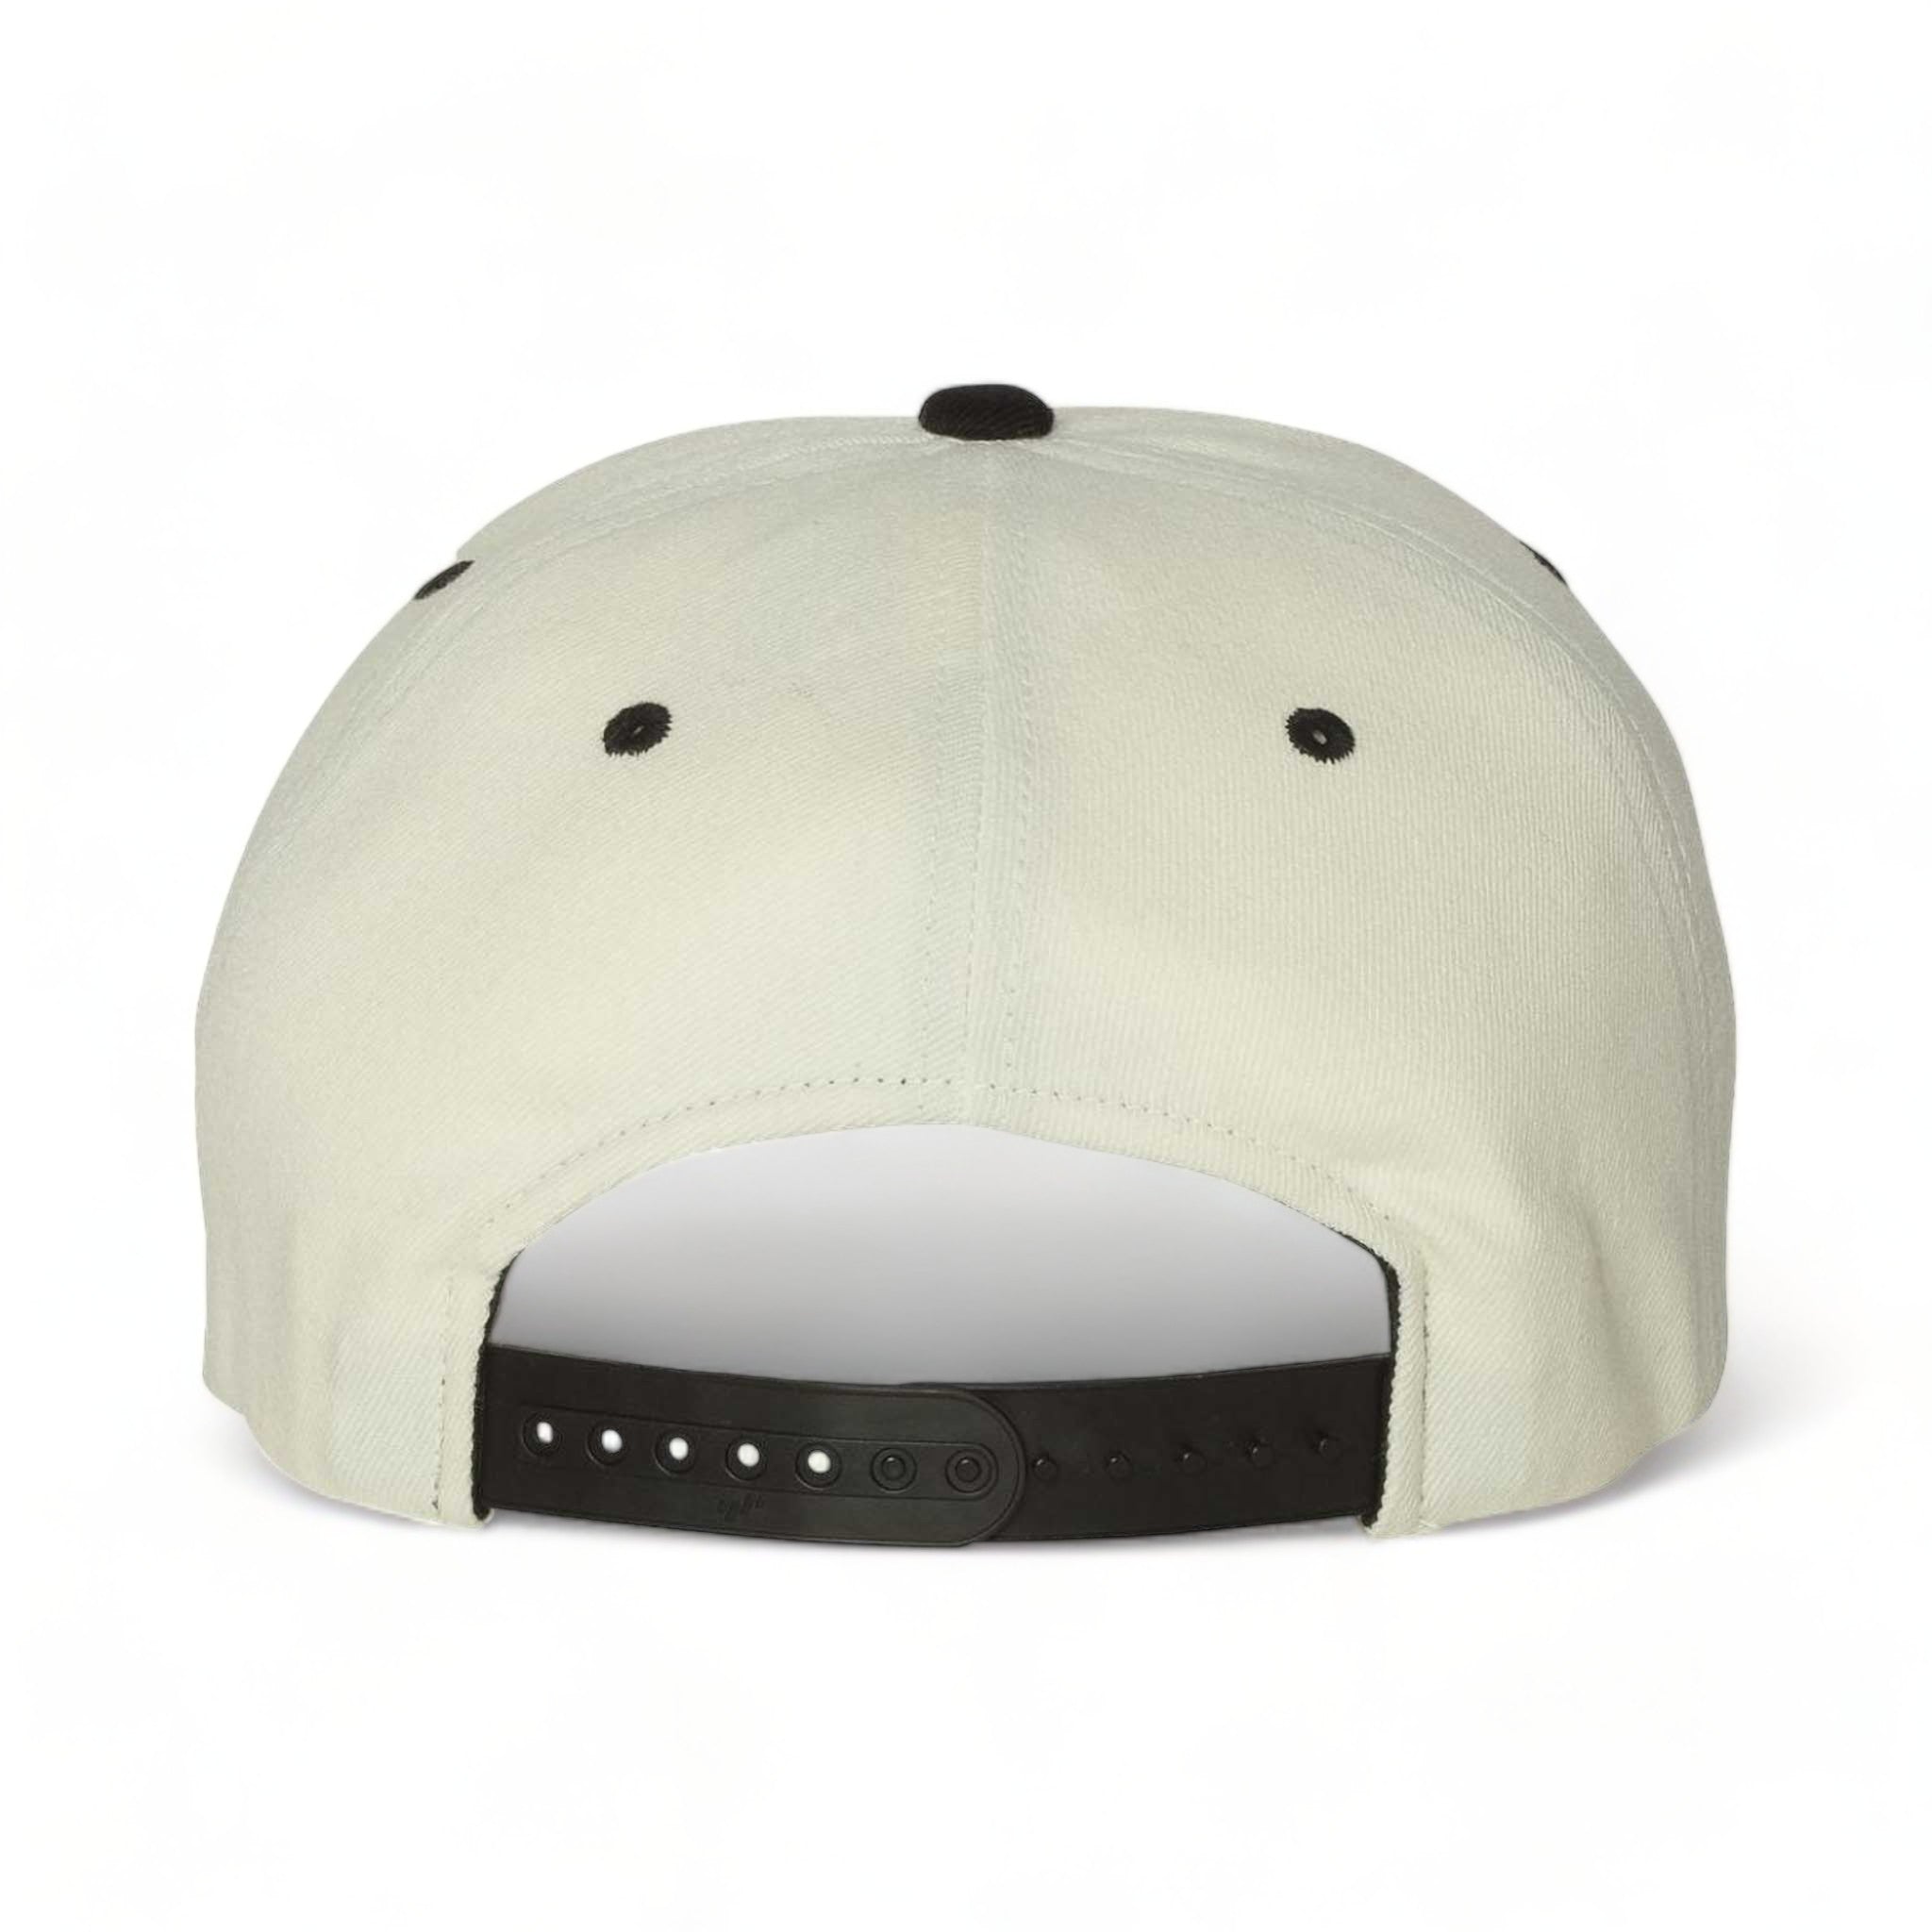 Back view of Flexfit 110F custom hat in natural and black